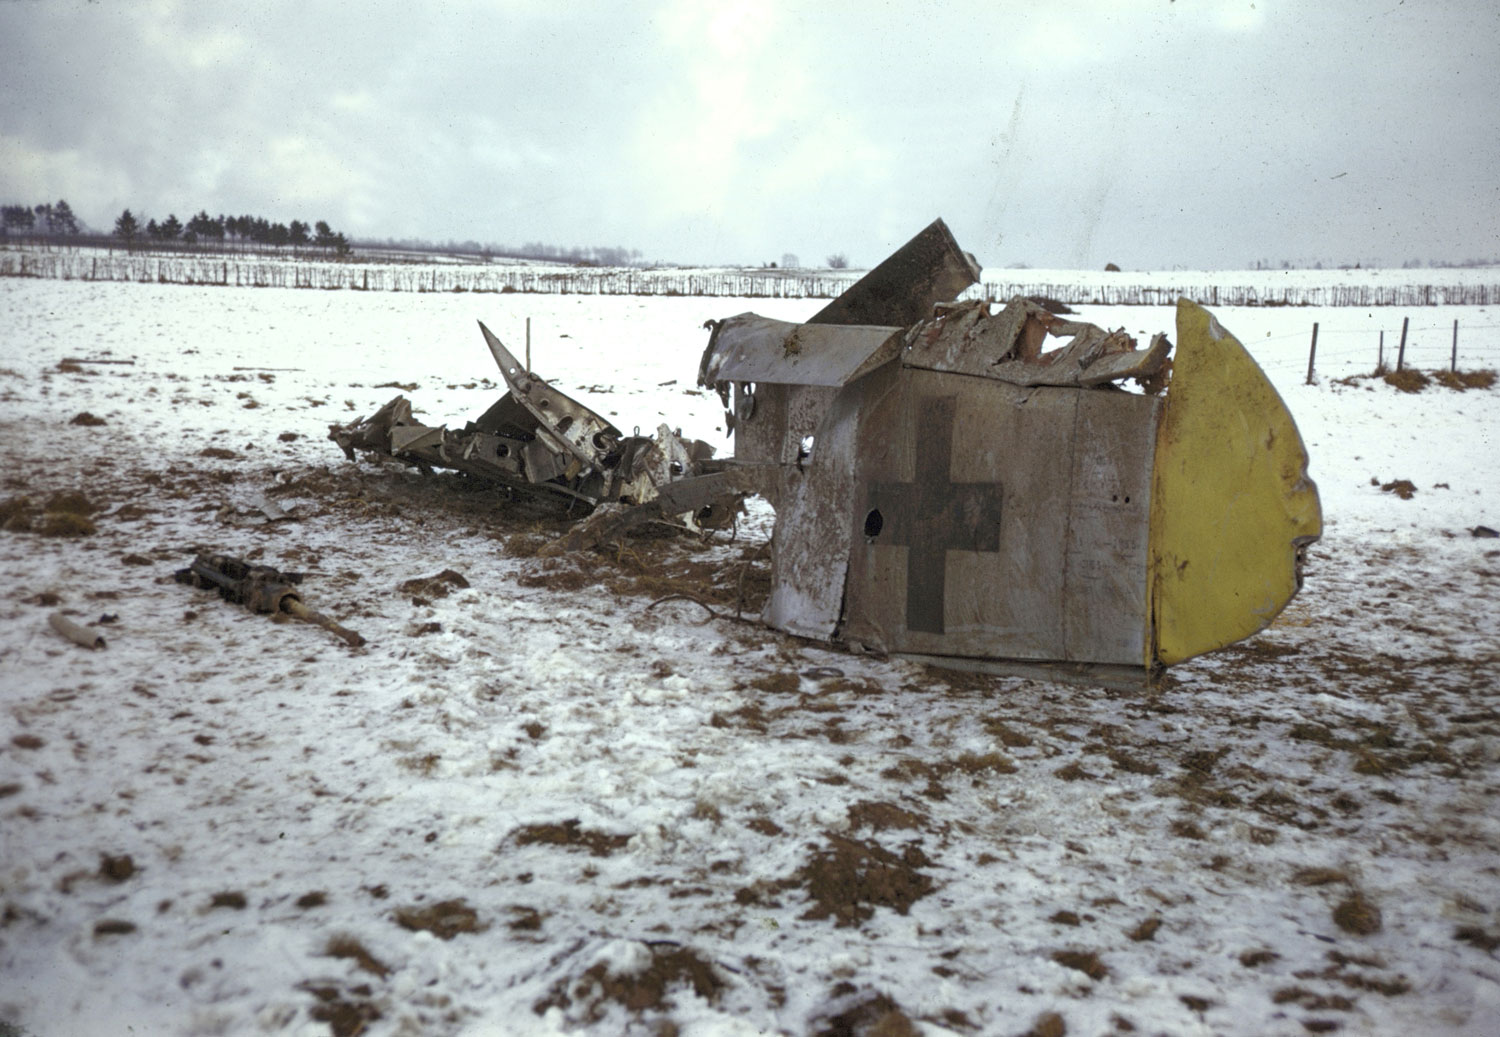 German military wreckage, Battle of the Bulge.